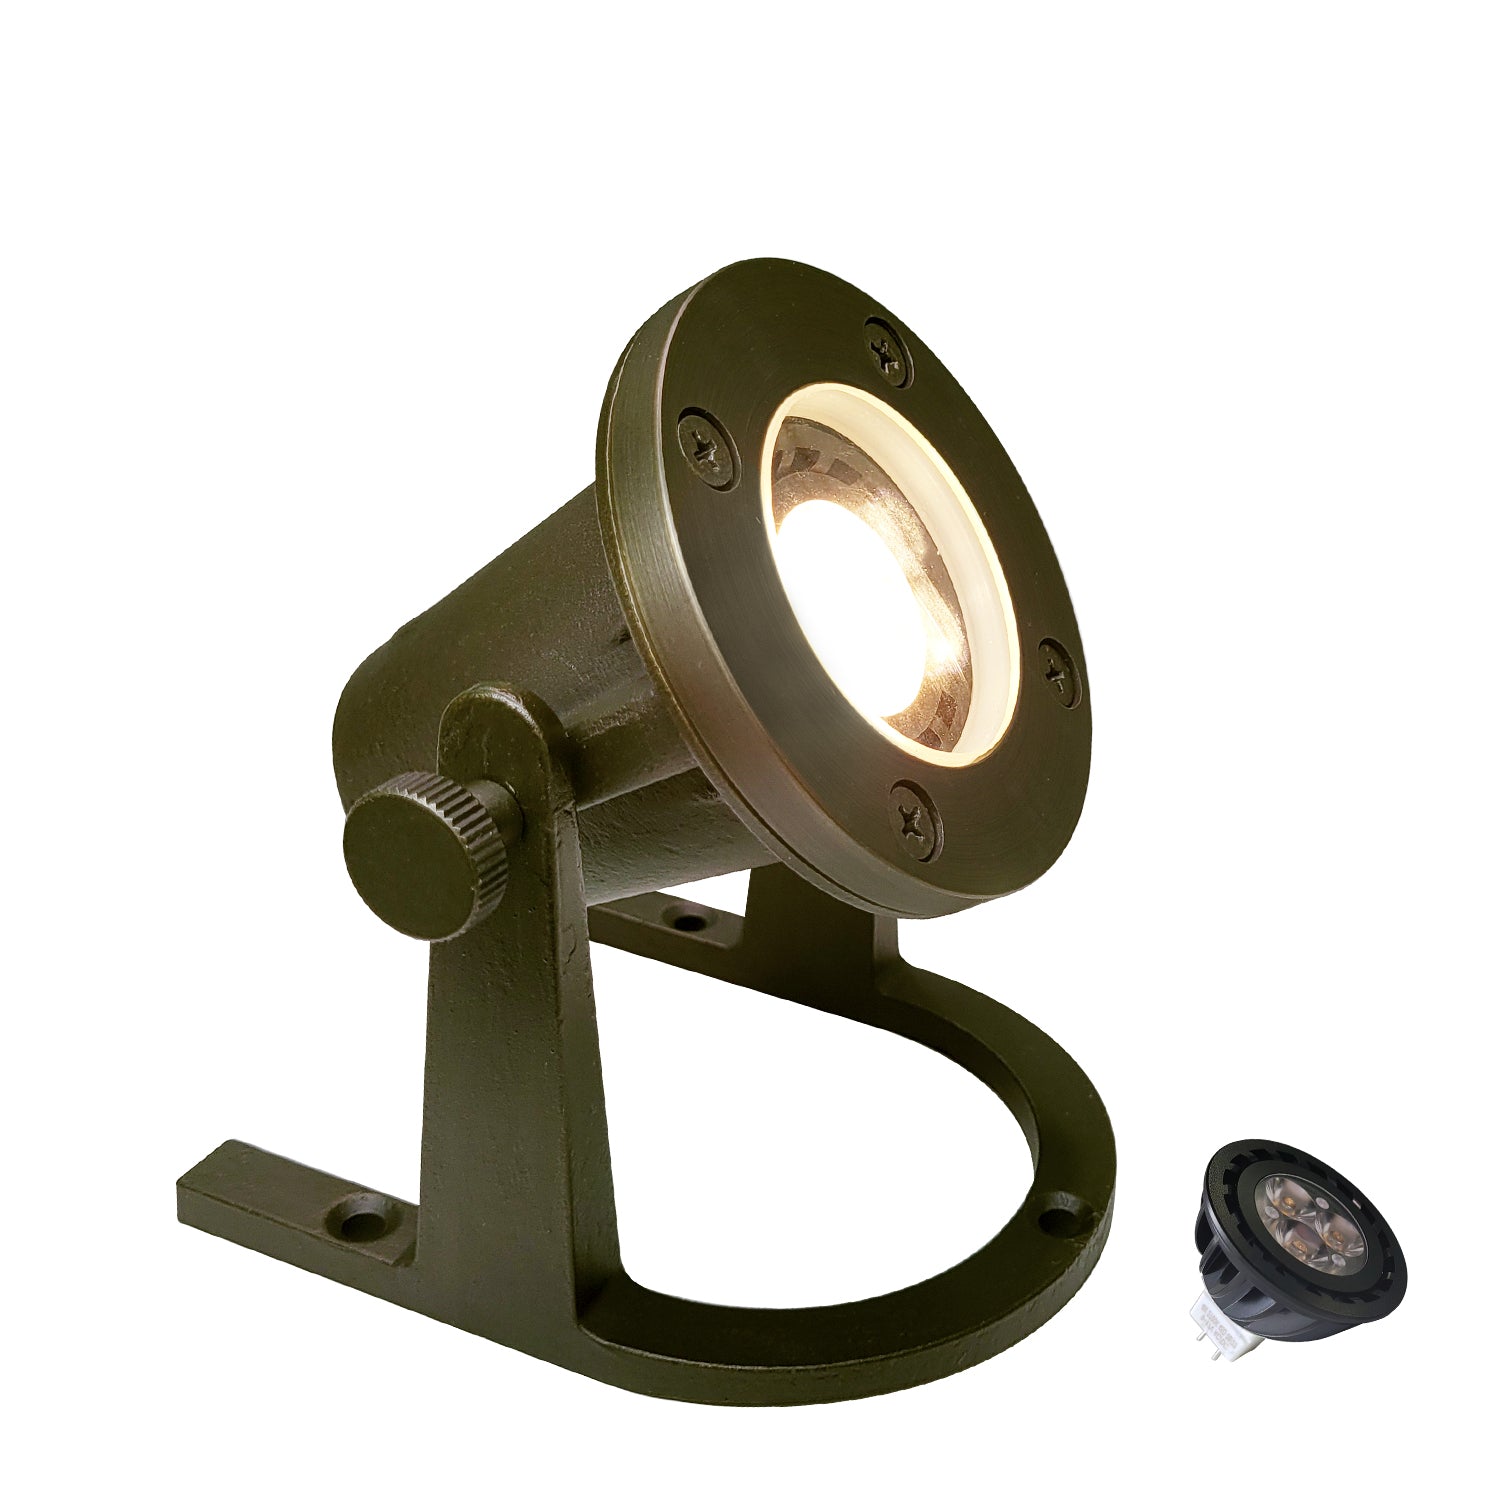 Brass underwater landscape light COU1201B suitable for pool and fountain lighting